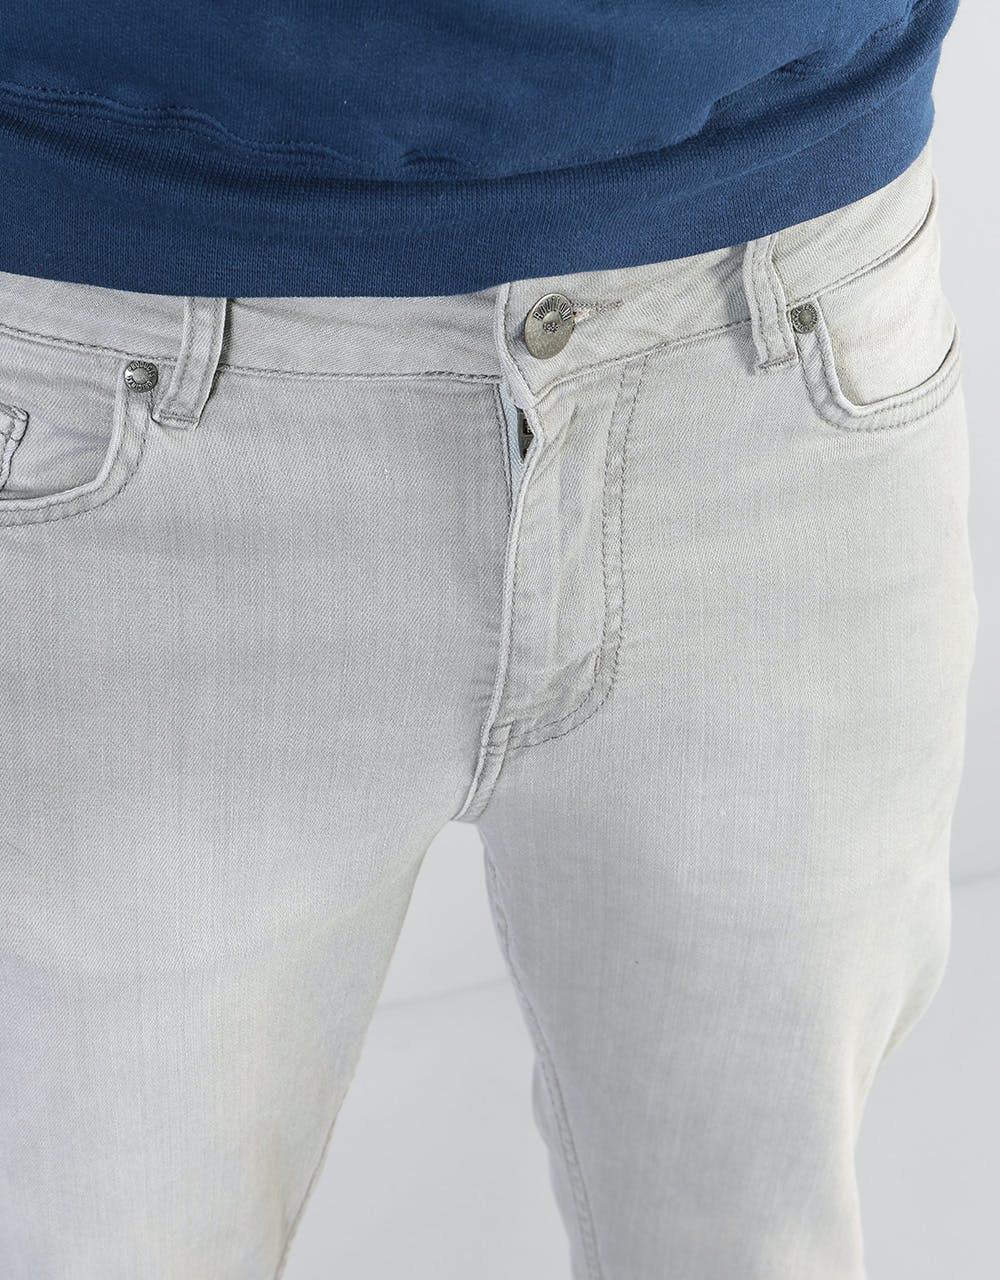 Route One Slim Denim Jeans - Washed Grey